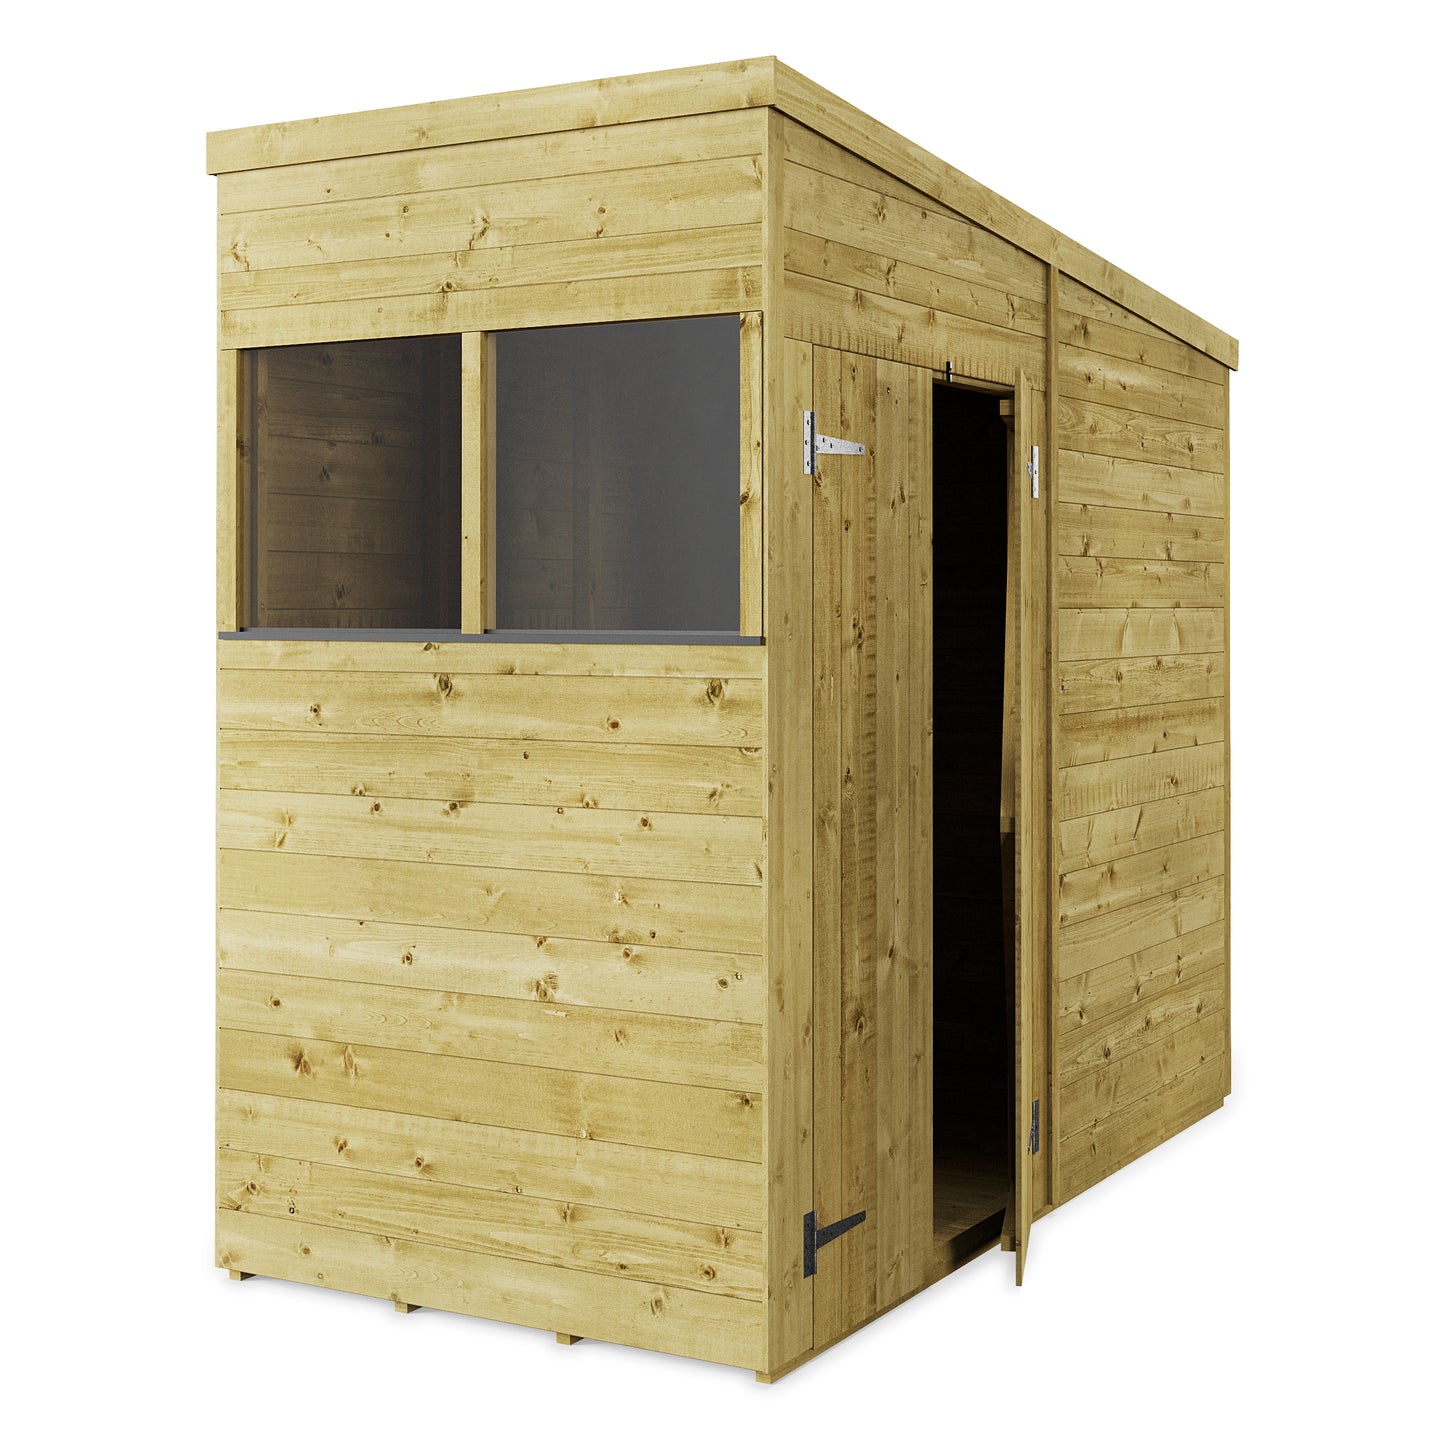 Store More 4 x 8 Tongue and Groove Pent Shed Windowed - Premium Garden